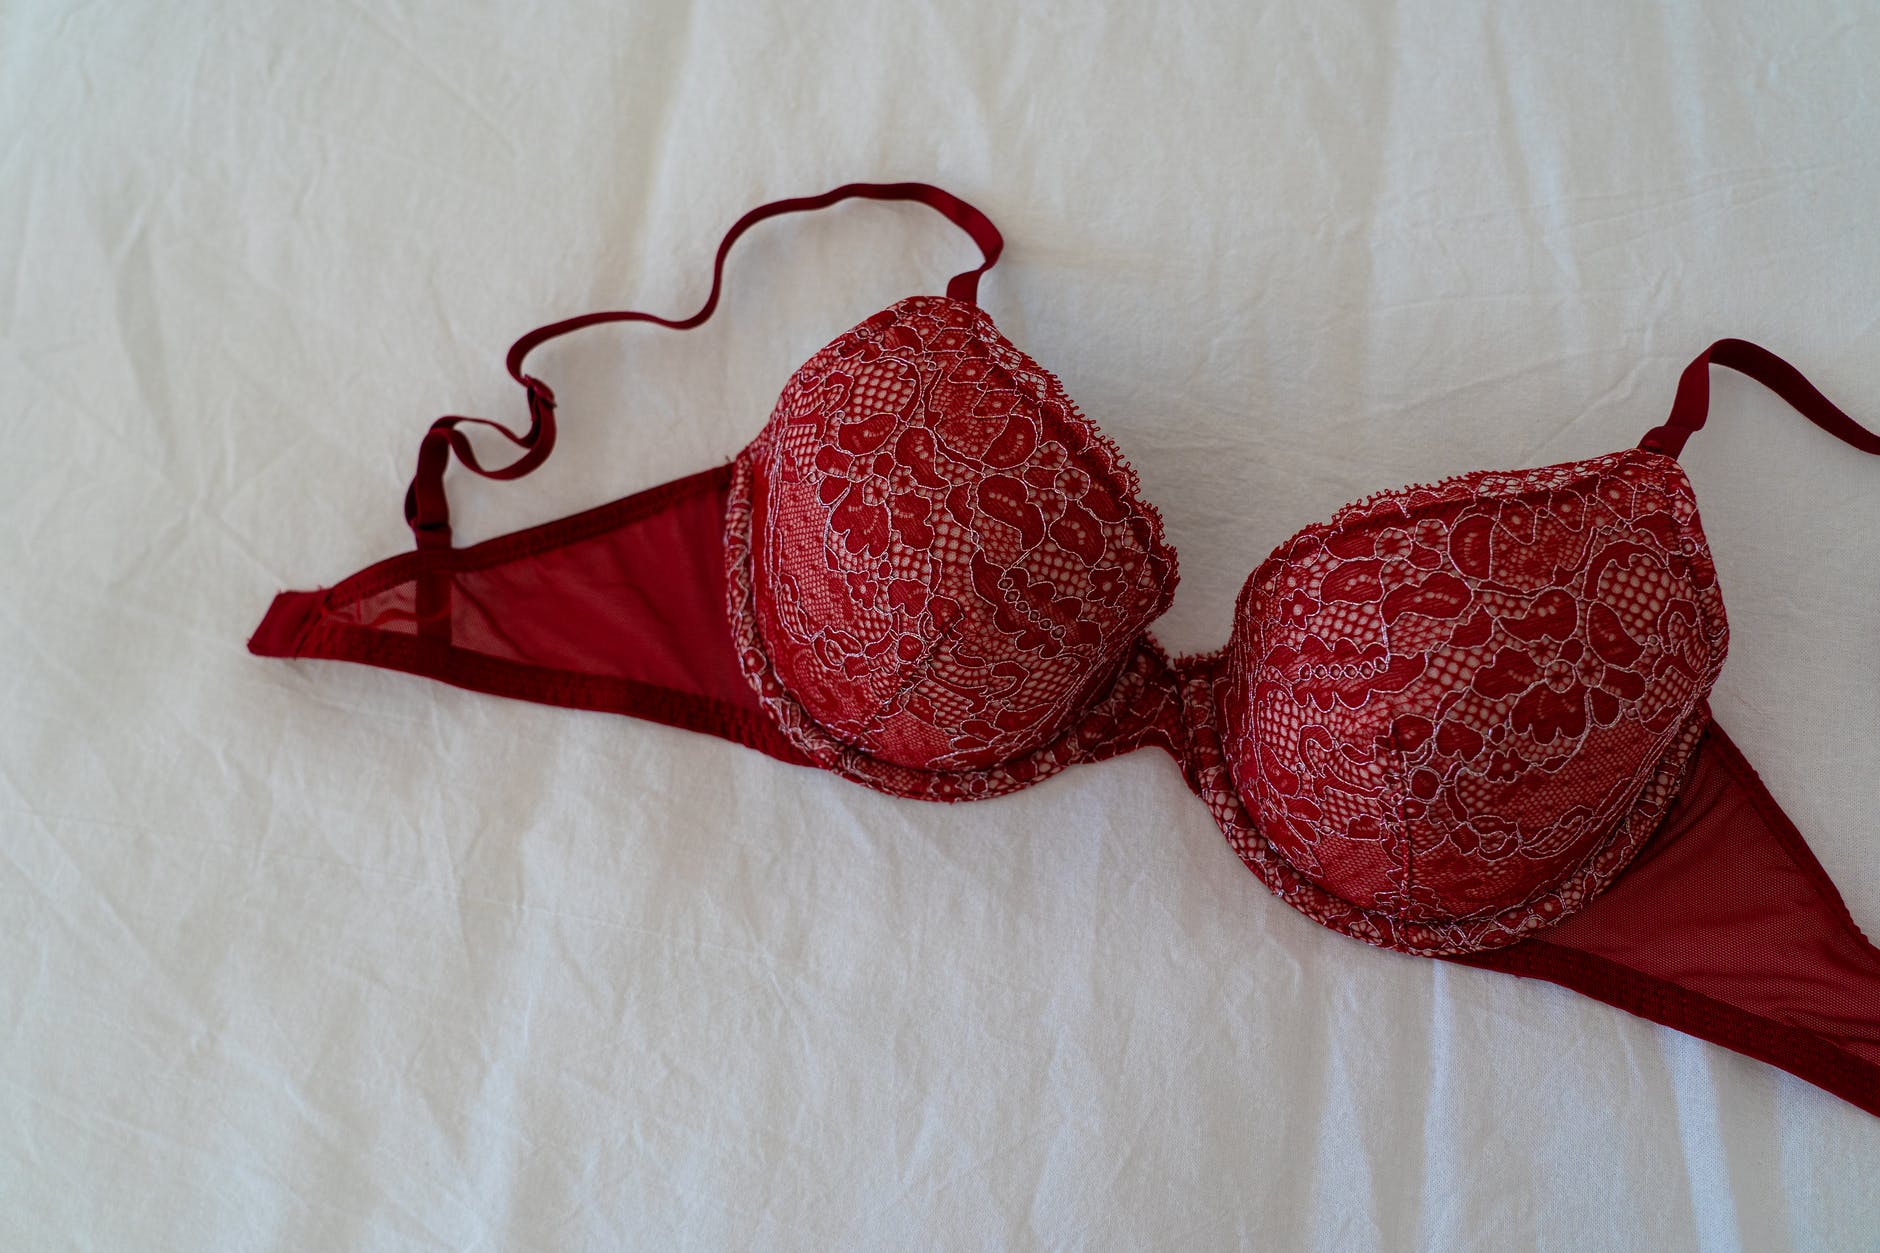 Bras. They can go. Or can they? – A Tribe Of Women